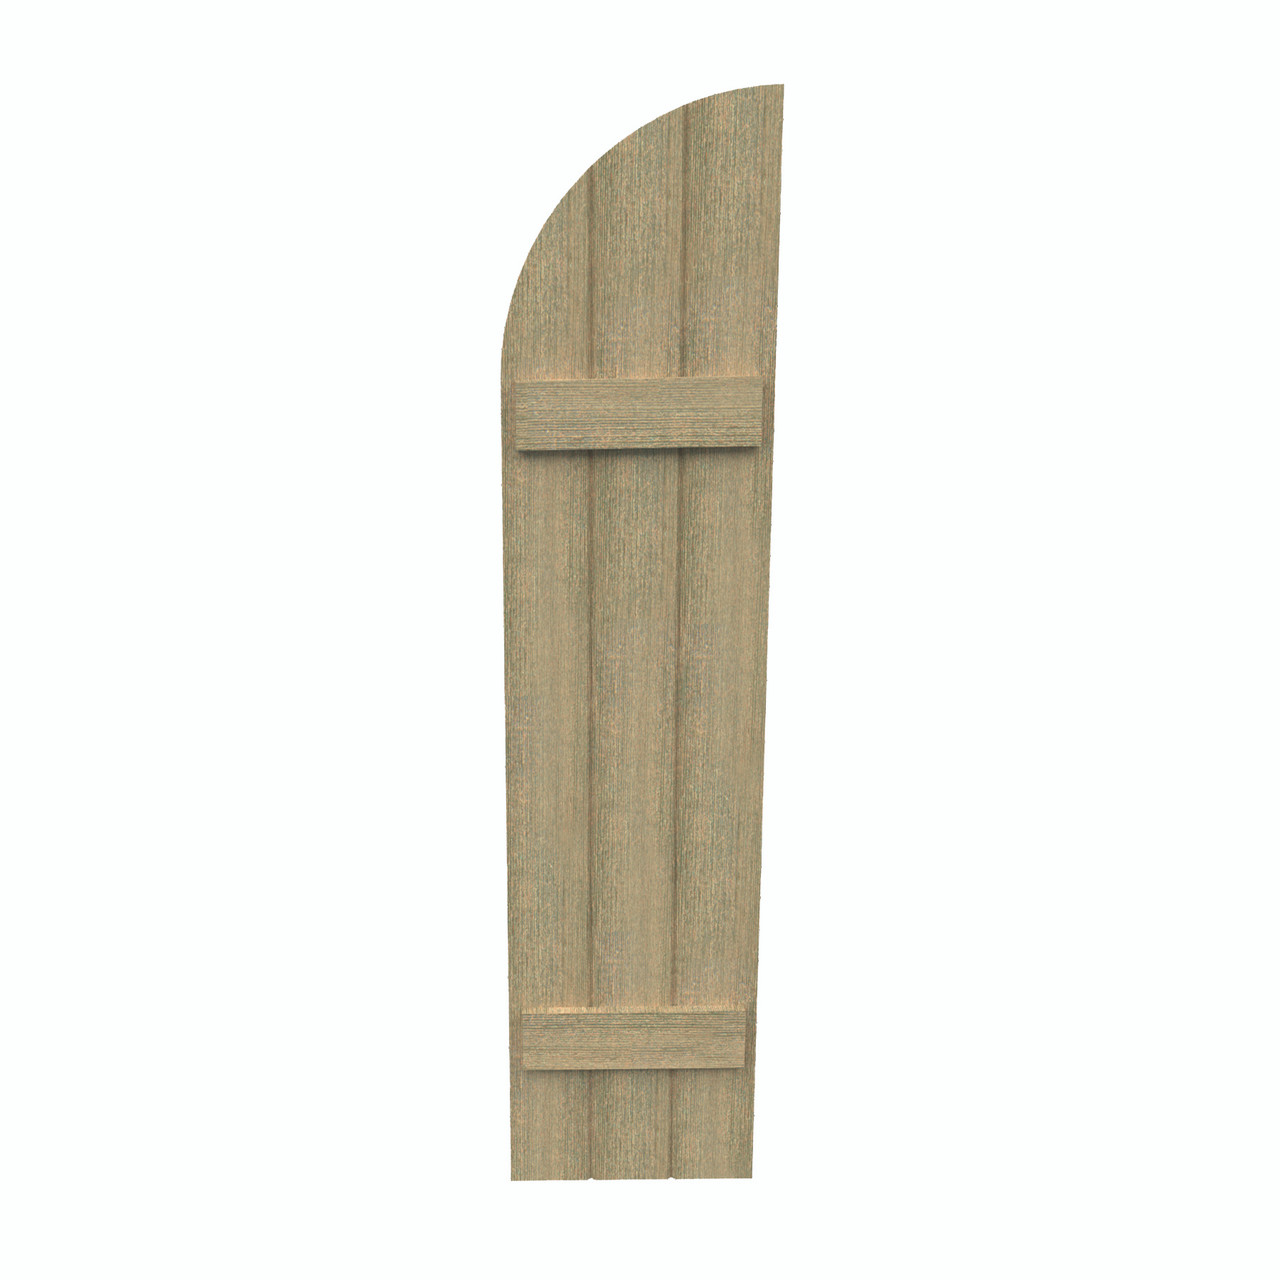 14 inch by 57 inch Quarter Round Shutter with 3-Boards